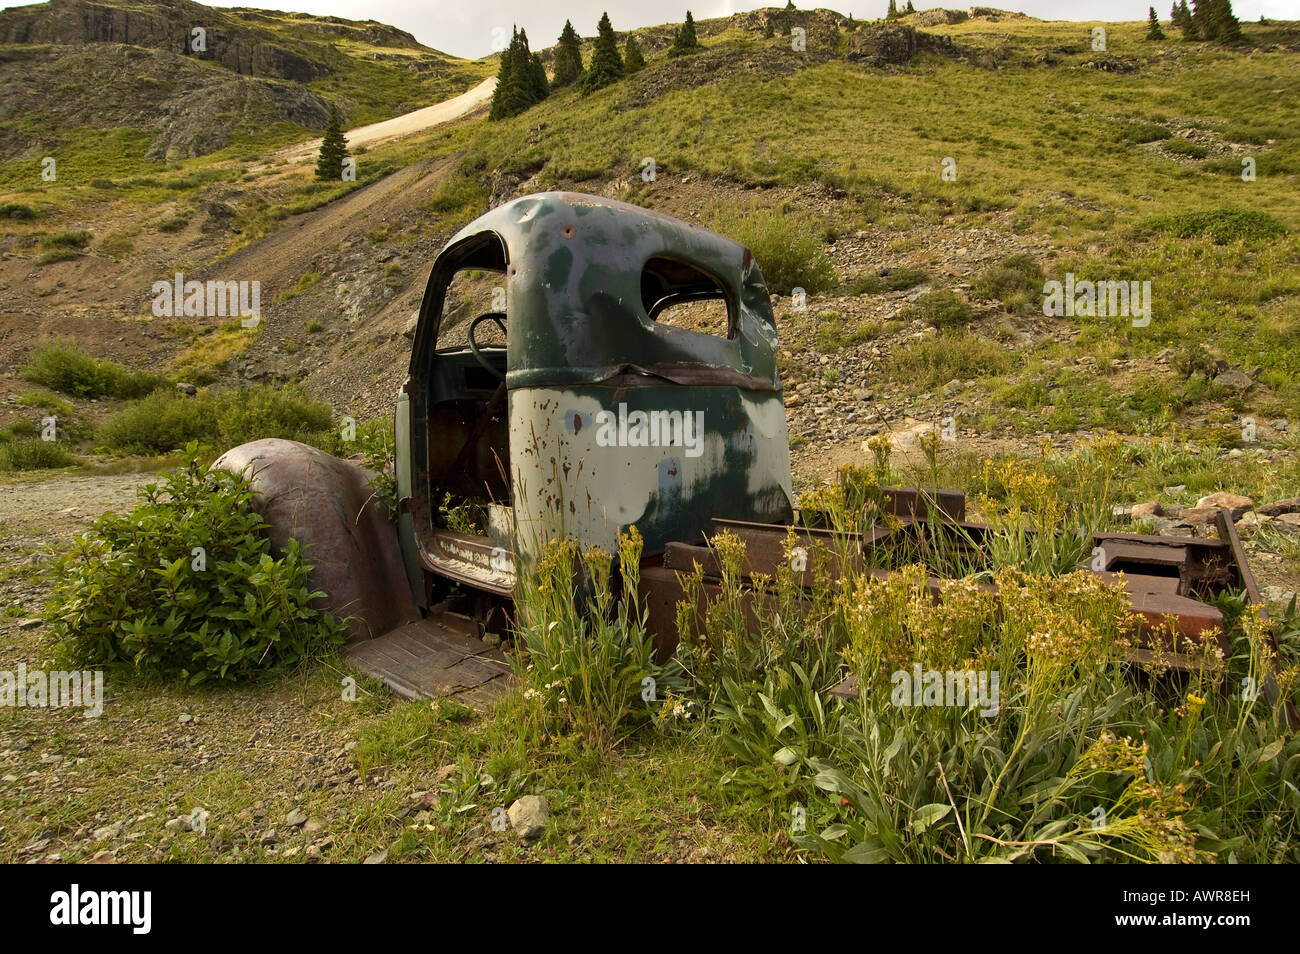 Remains of old truck, Animas Forks near Silverton, Alpine Loop Scenic Byway, San Juan Mountains, Colorado. Stock Photo